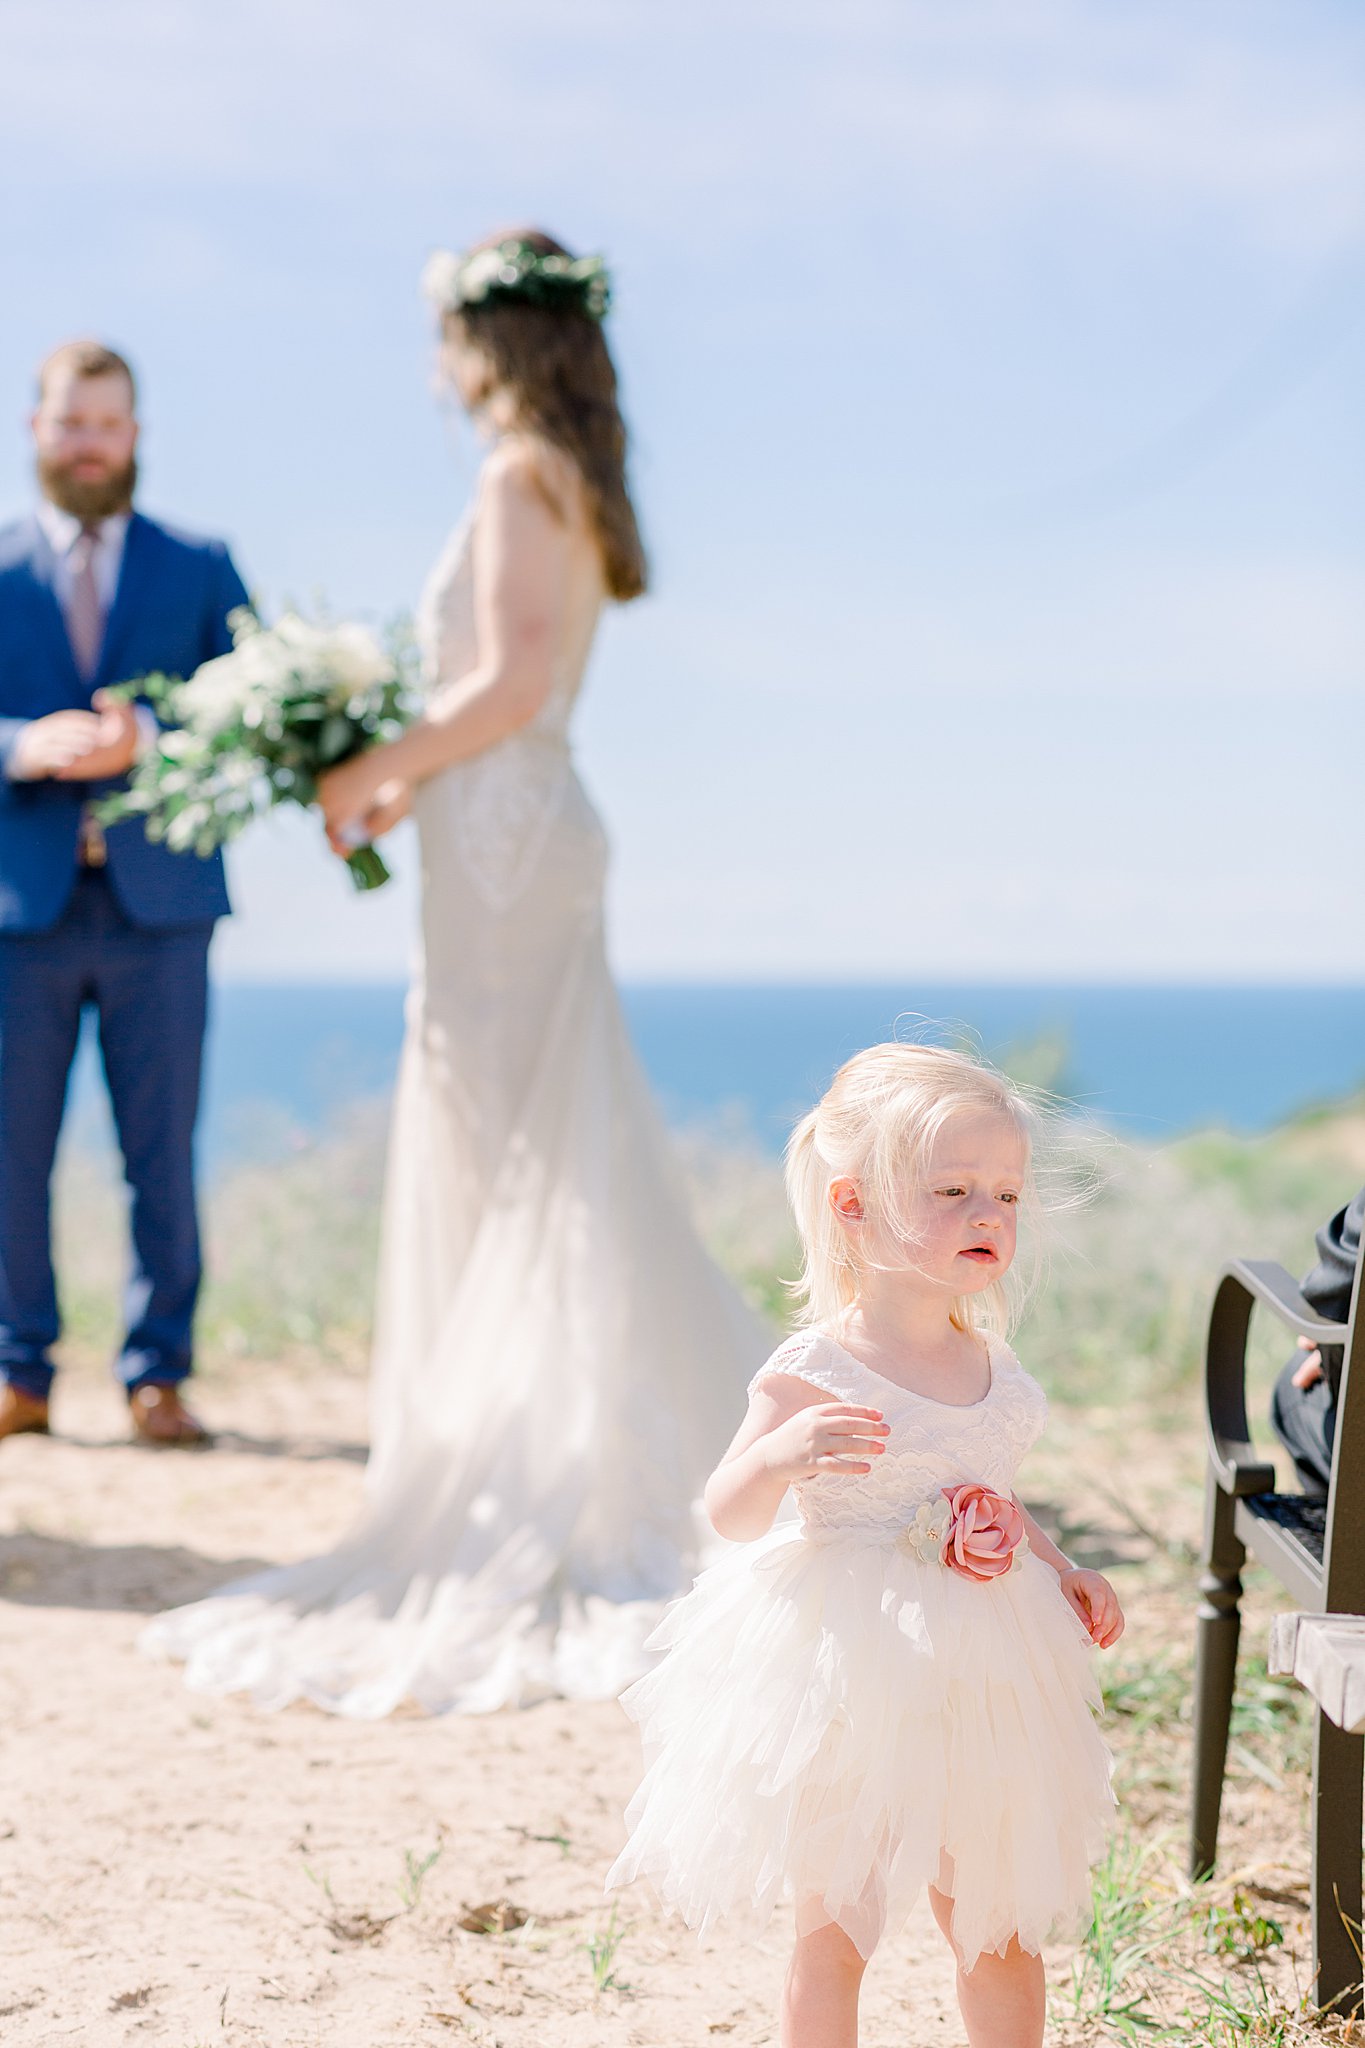 Flower girl explores aisle during Northern Michigan elopement wedding ceremony.